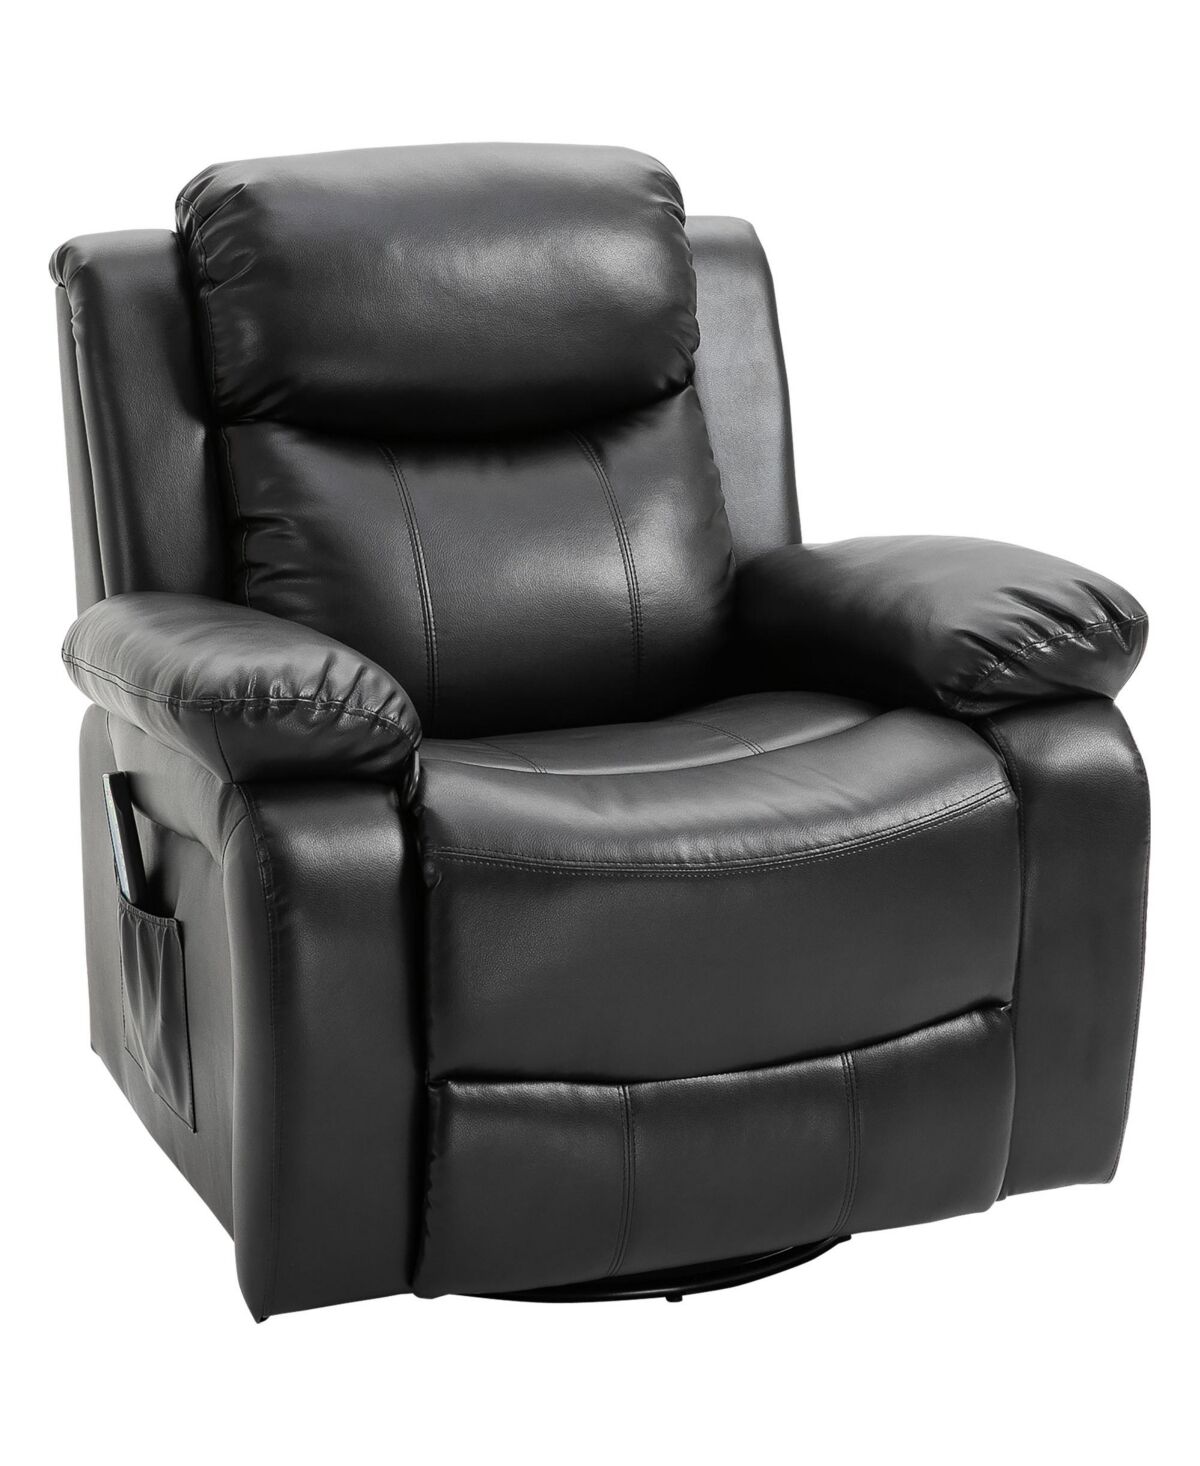 Homcom Pu Leather Massage Recliner Chair, Swivel Rocker Sofa with Remote Control, Footrest, Padded Seat for Living Room, Bedroom, Black - Black